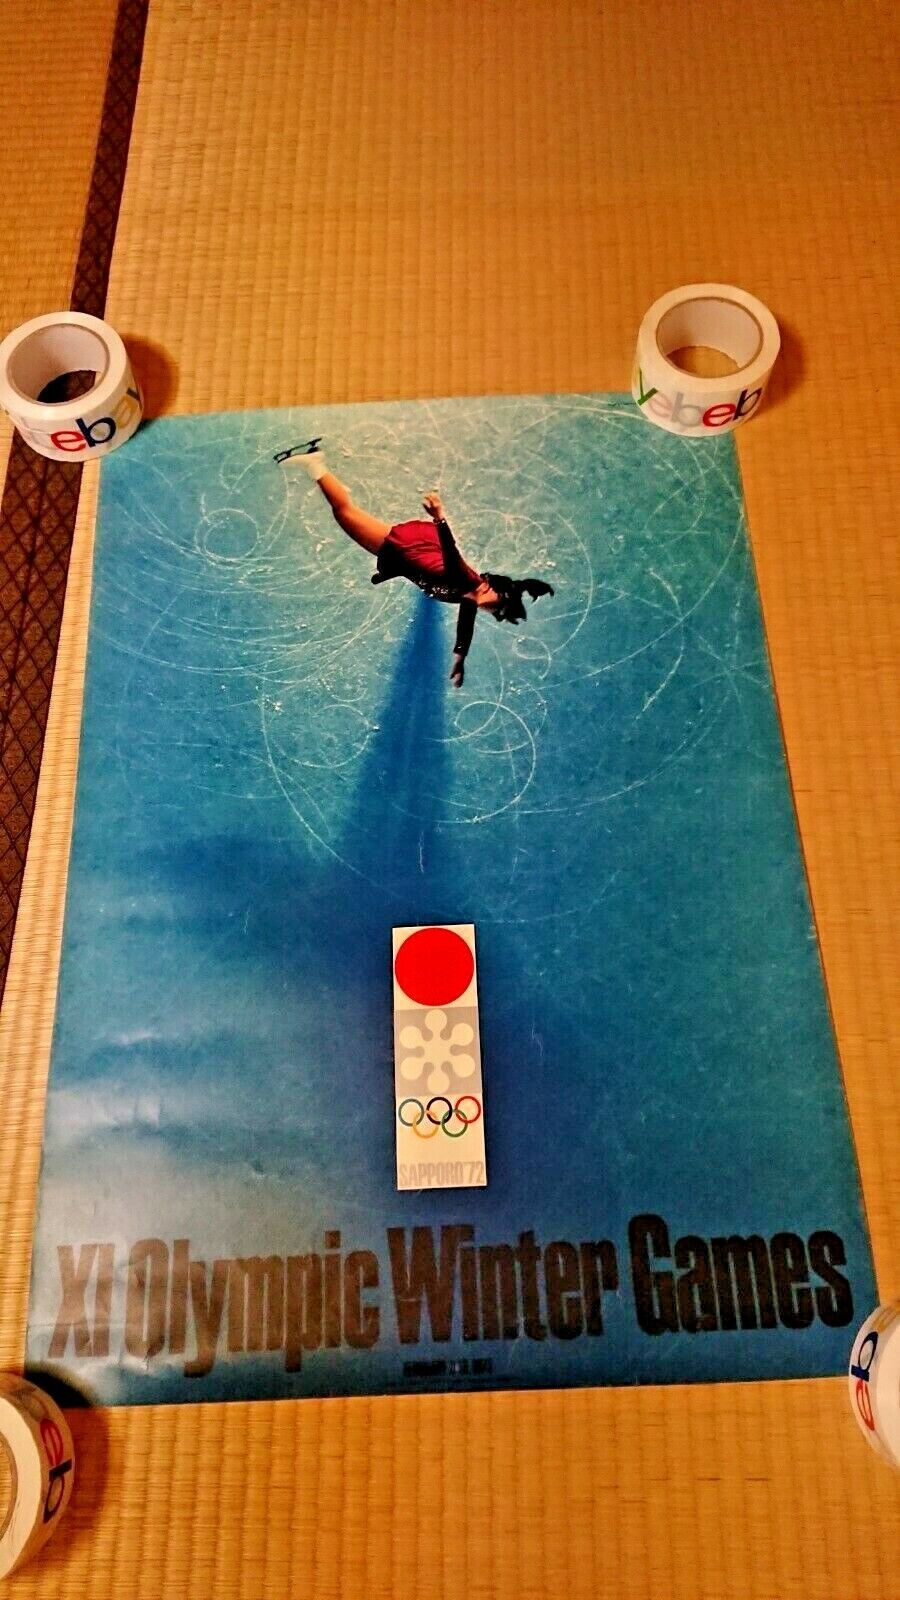 Vintage SAPPORO 1972 WINTER OLYMPICS Poster From Japan with Commemorative Coin 1